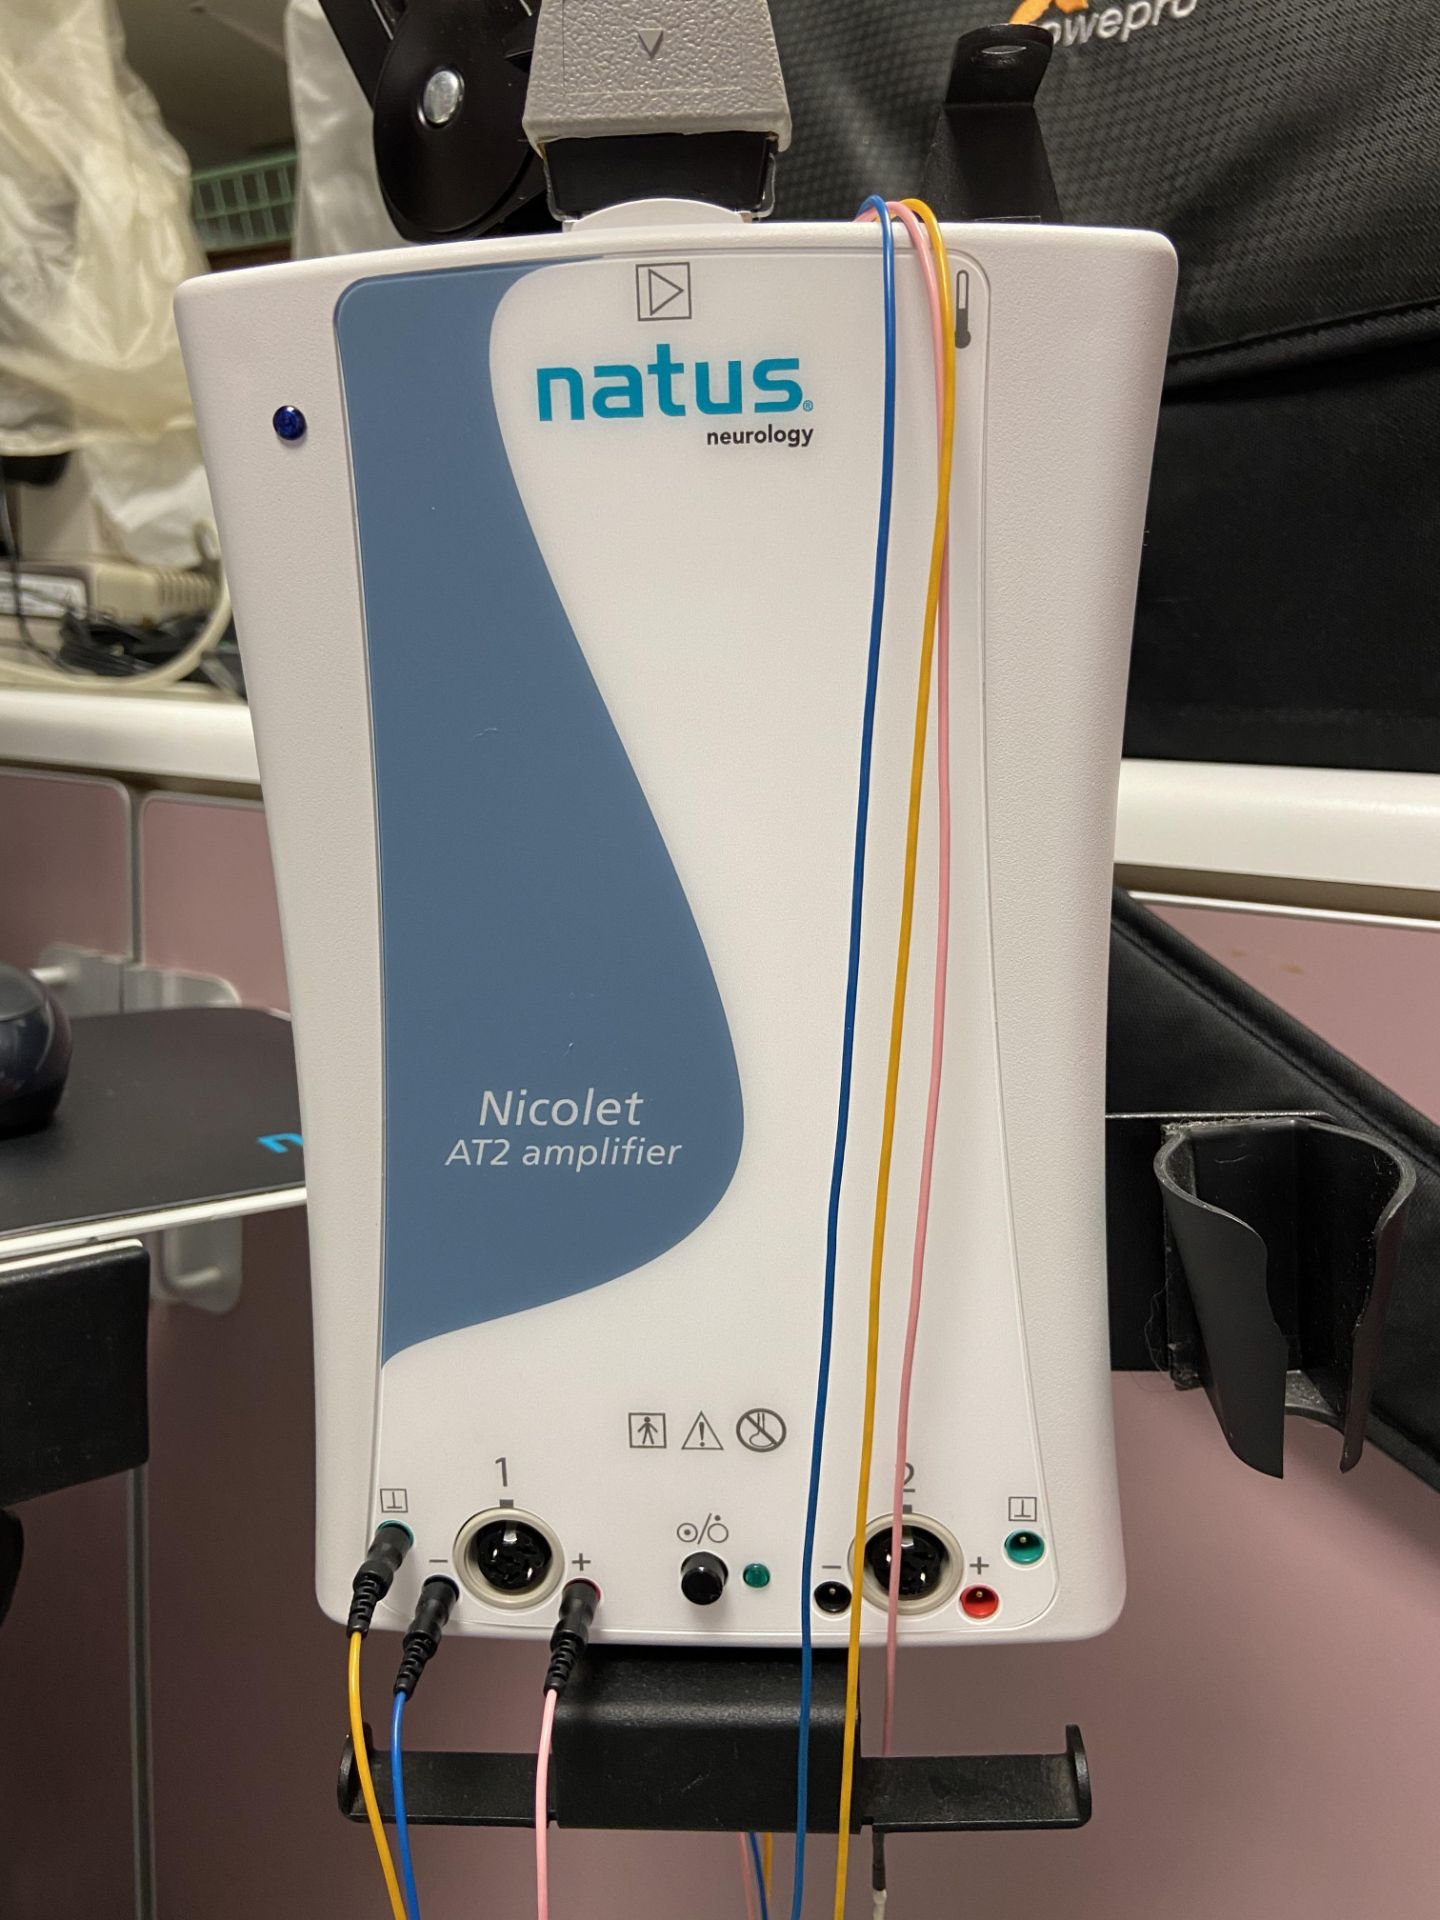 Natus neurology trolley mounted hearing test system with Nicolet AT2 amplifier and Telephonics TDH- - Image 3 of 4